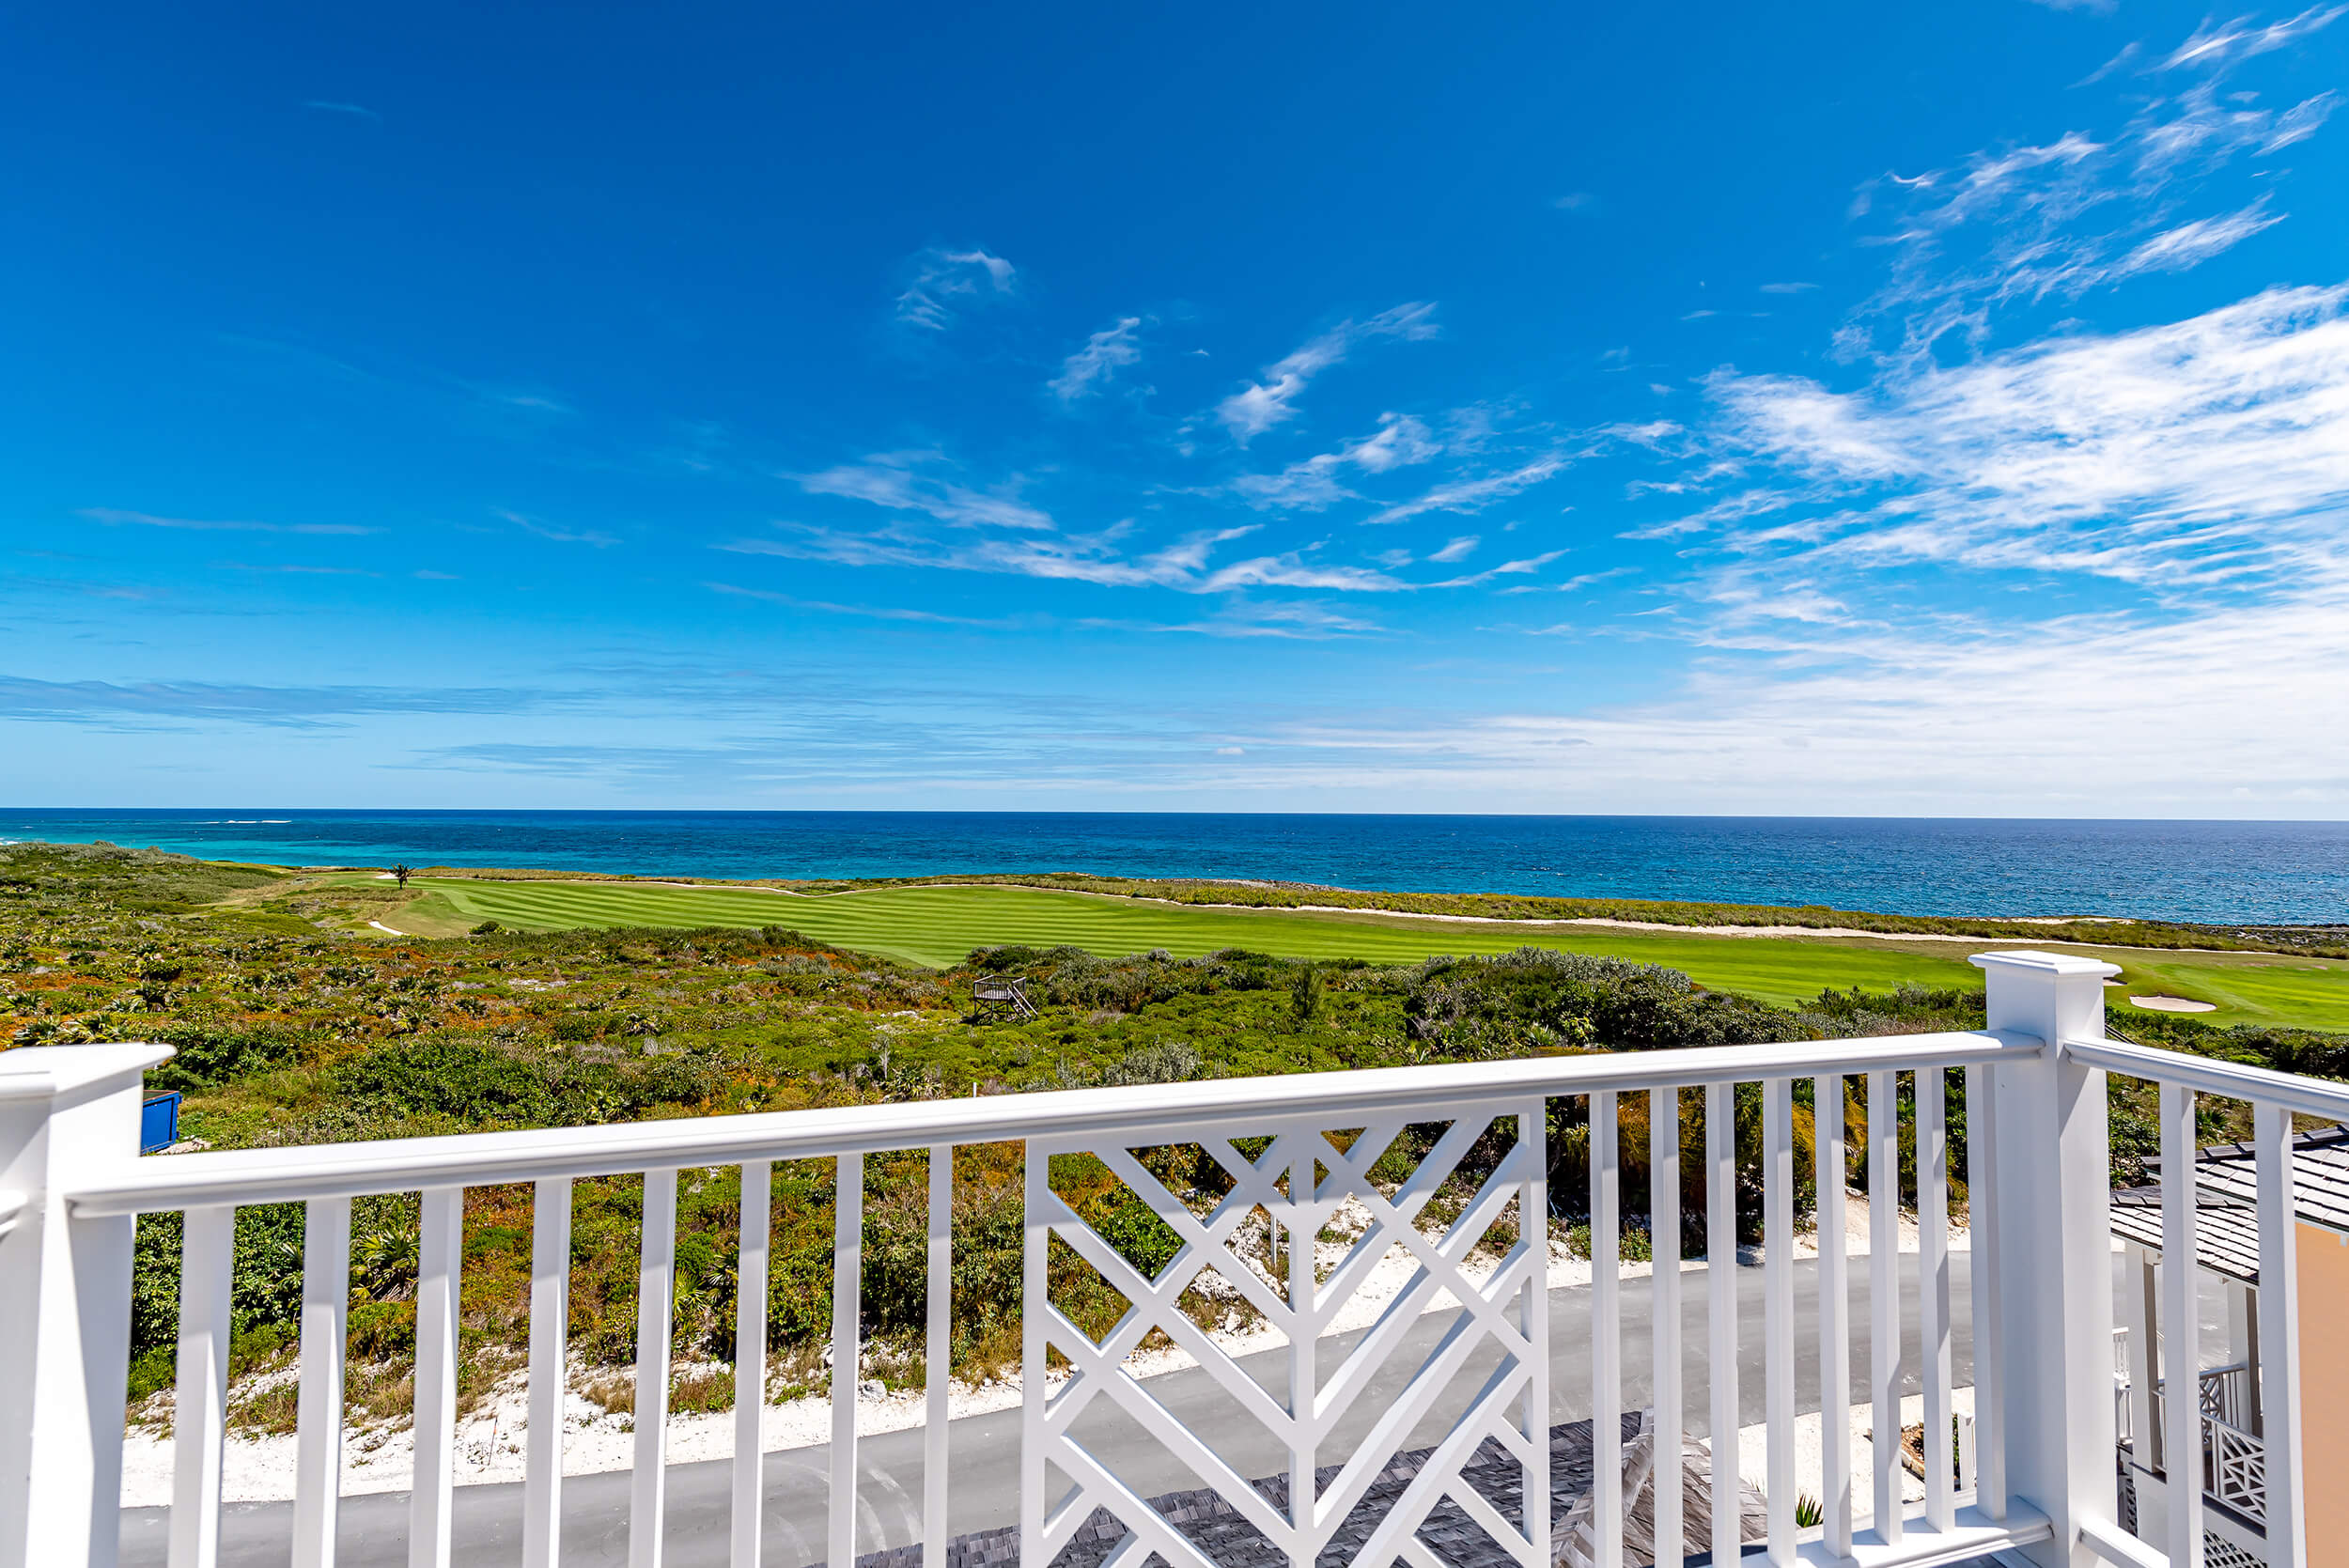 Golf course at The Abaco Club with ocean views, symbolizing the luxury of club lifestyle and coastal living